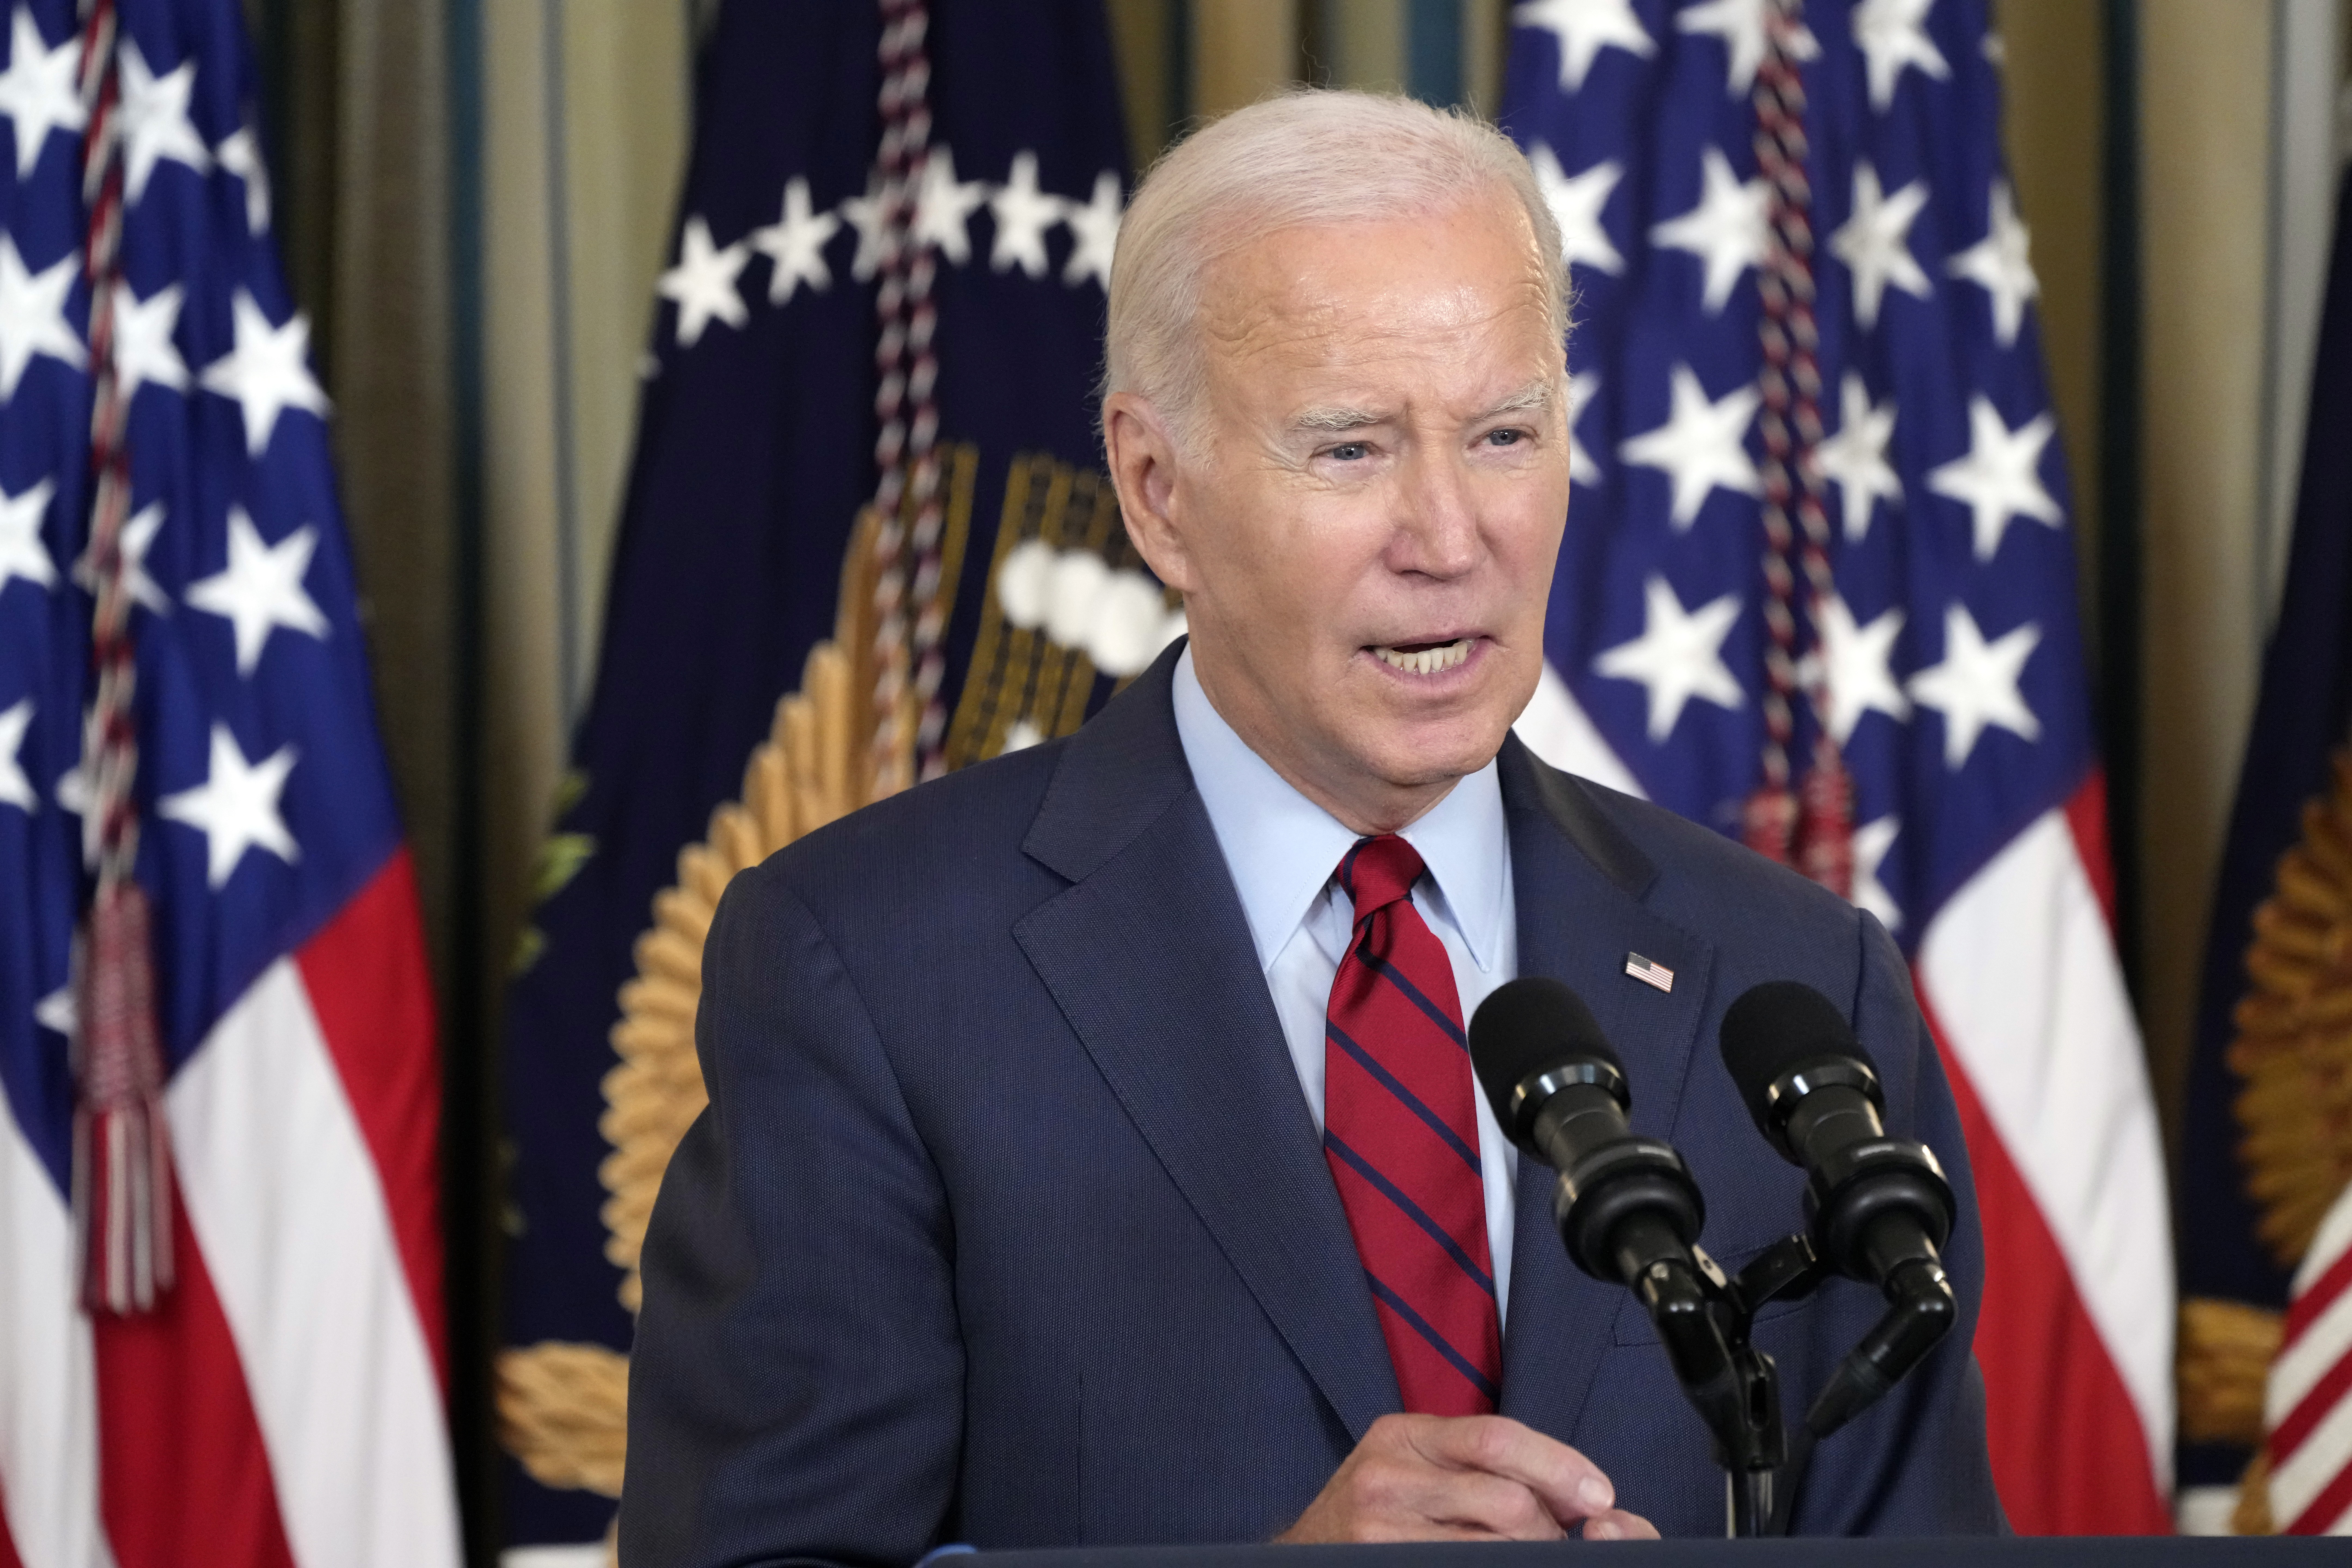 Trump leads Biden in CNN poll, but issues data paints even worse picture for incumbent